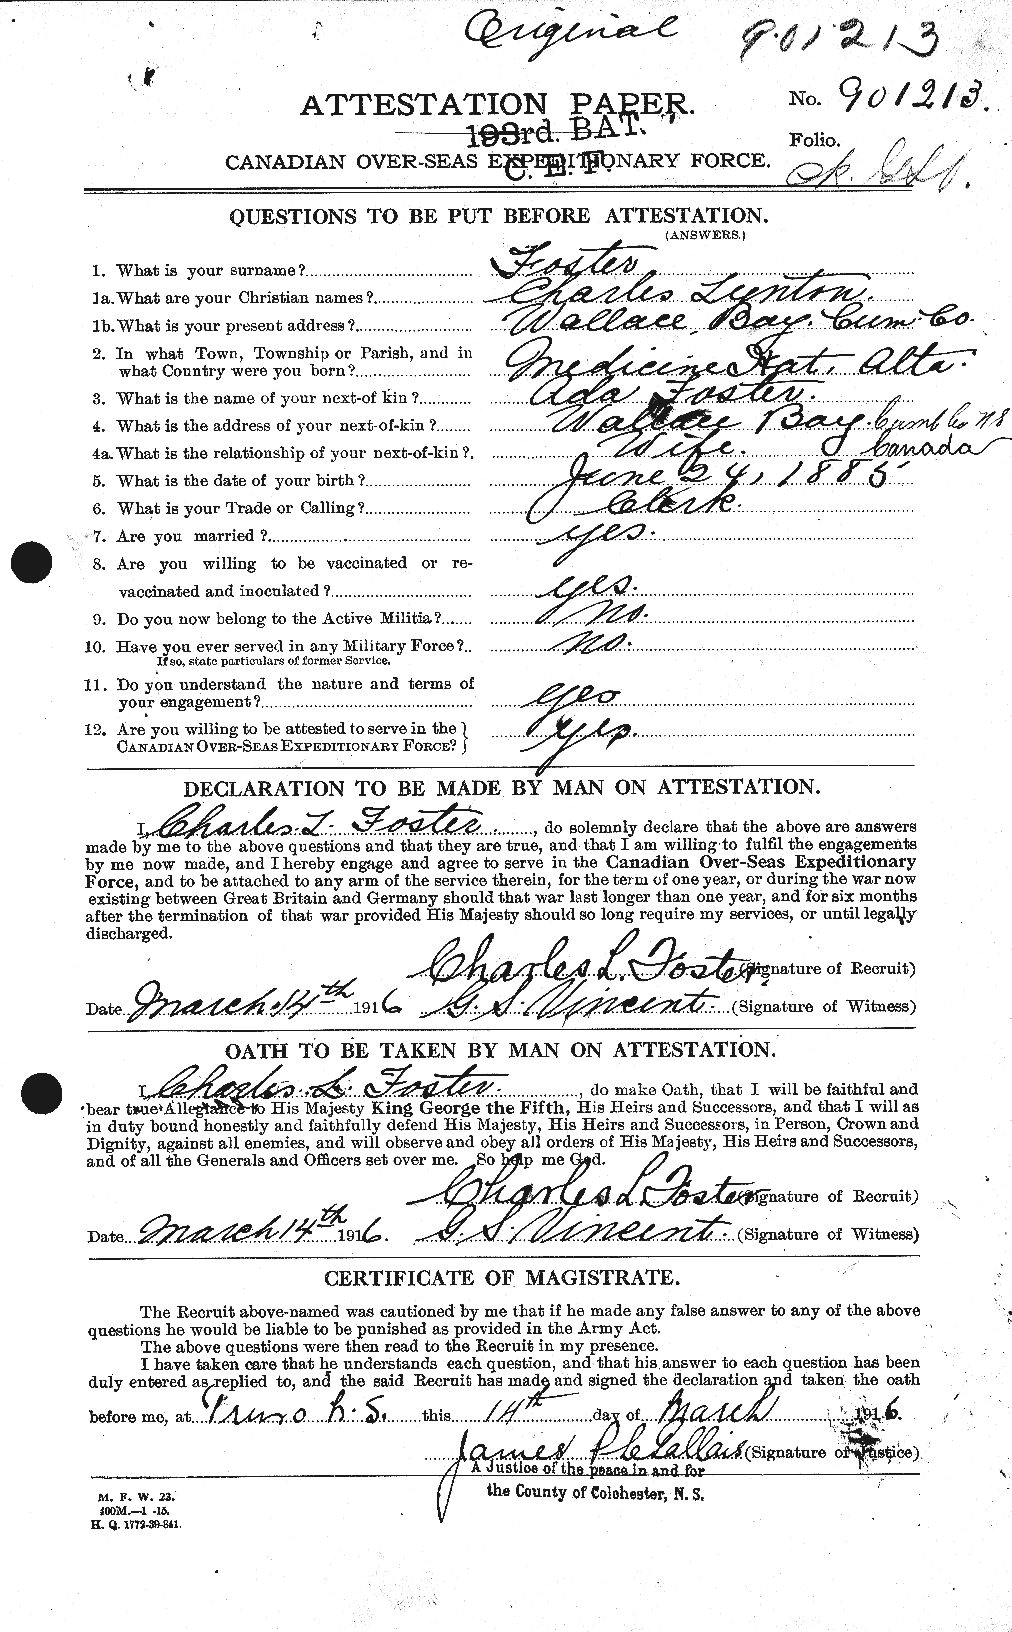 Personnel Records of the First World War - CEF 330524a